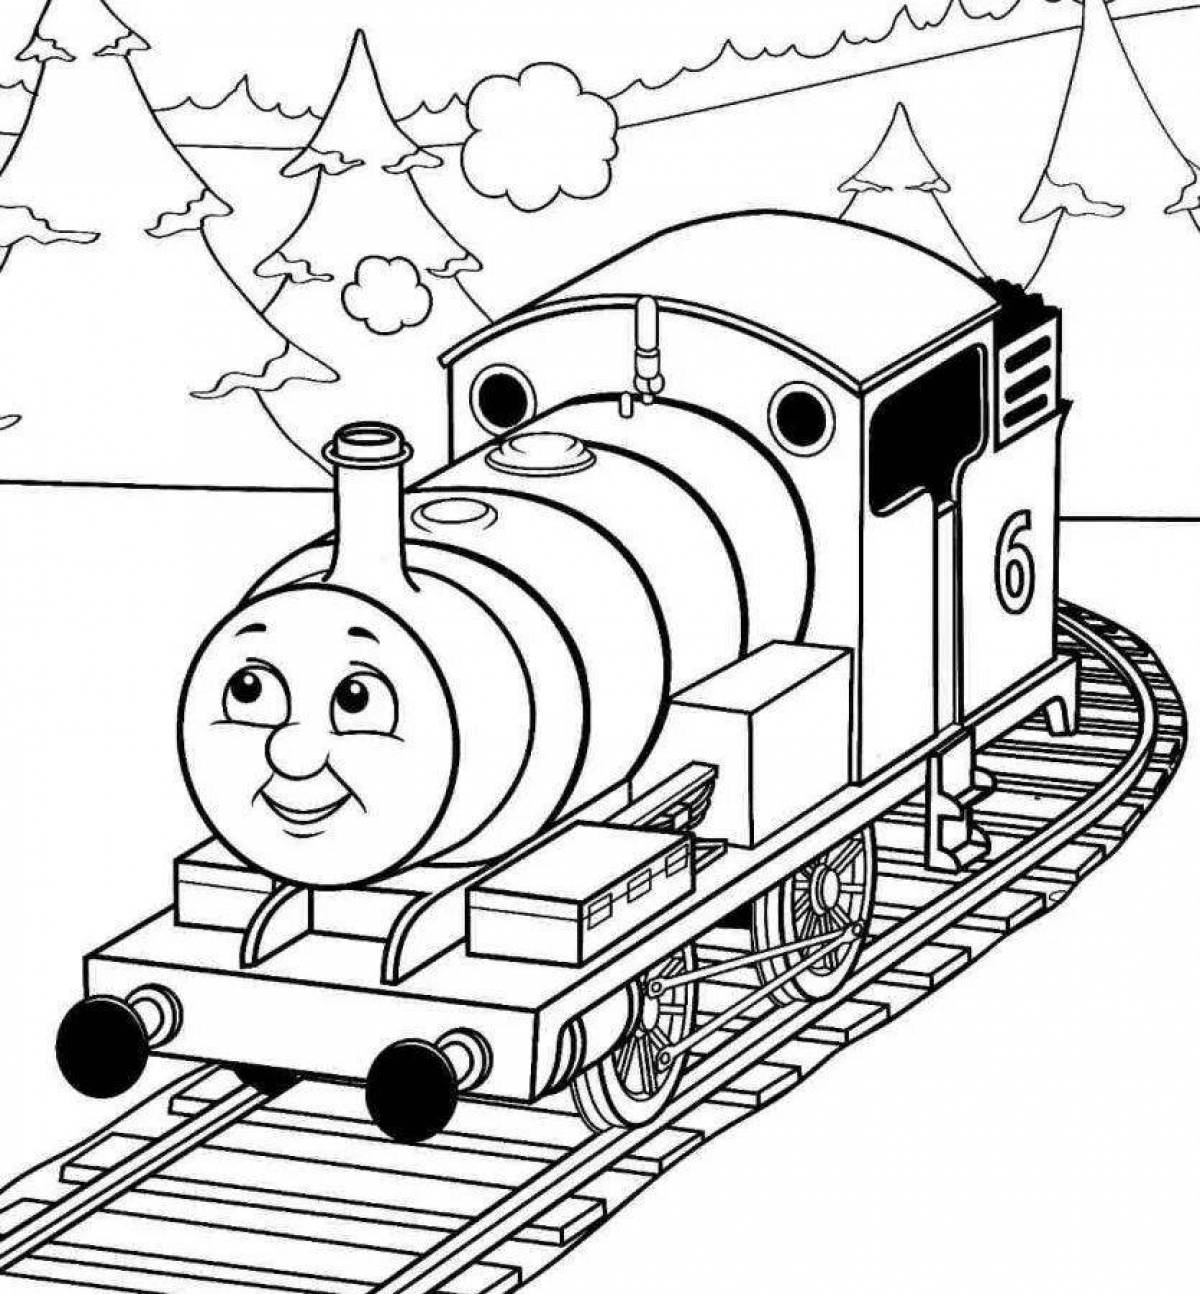 Lively the engine charles coloring book